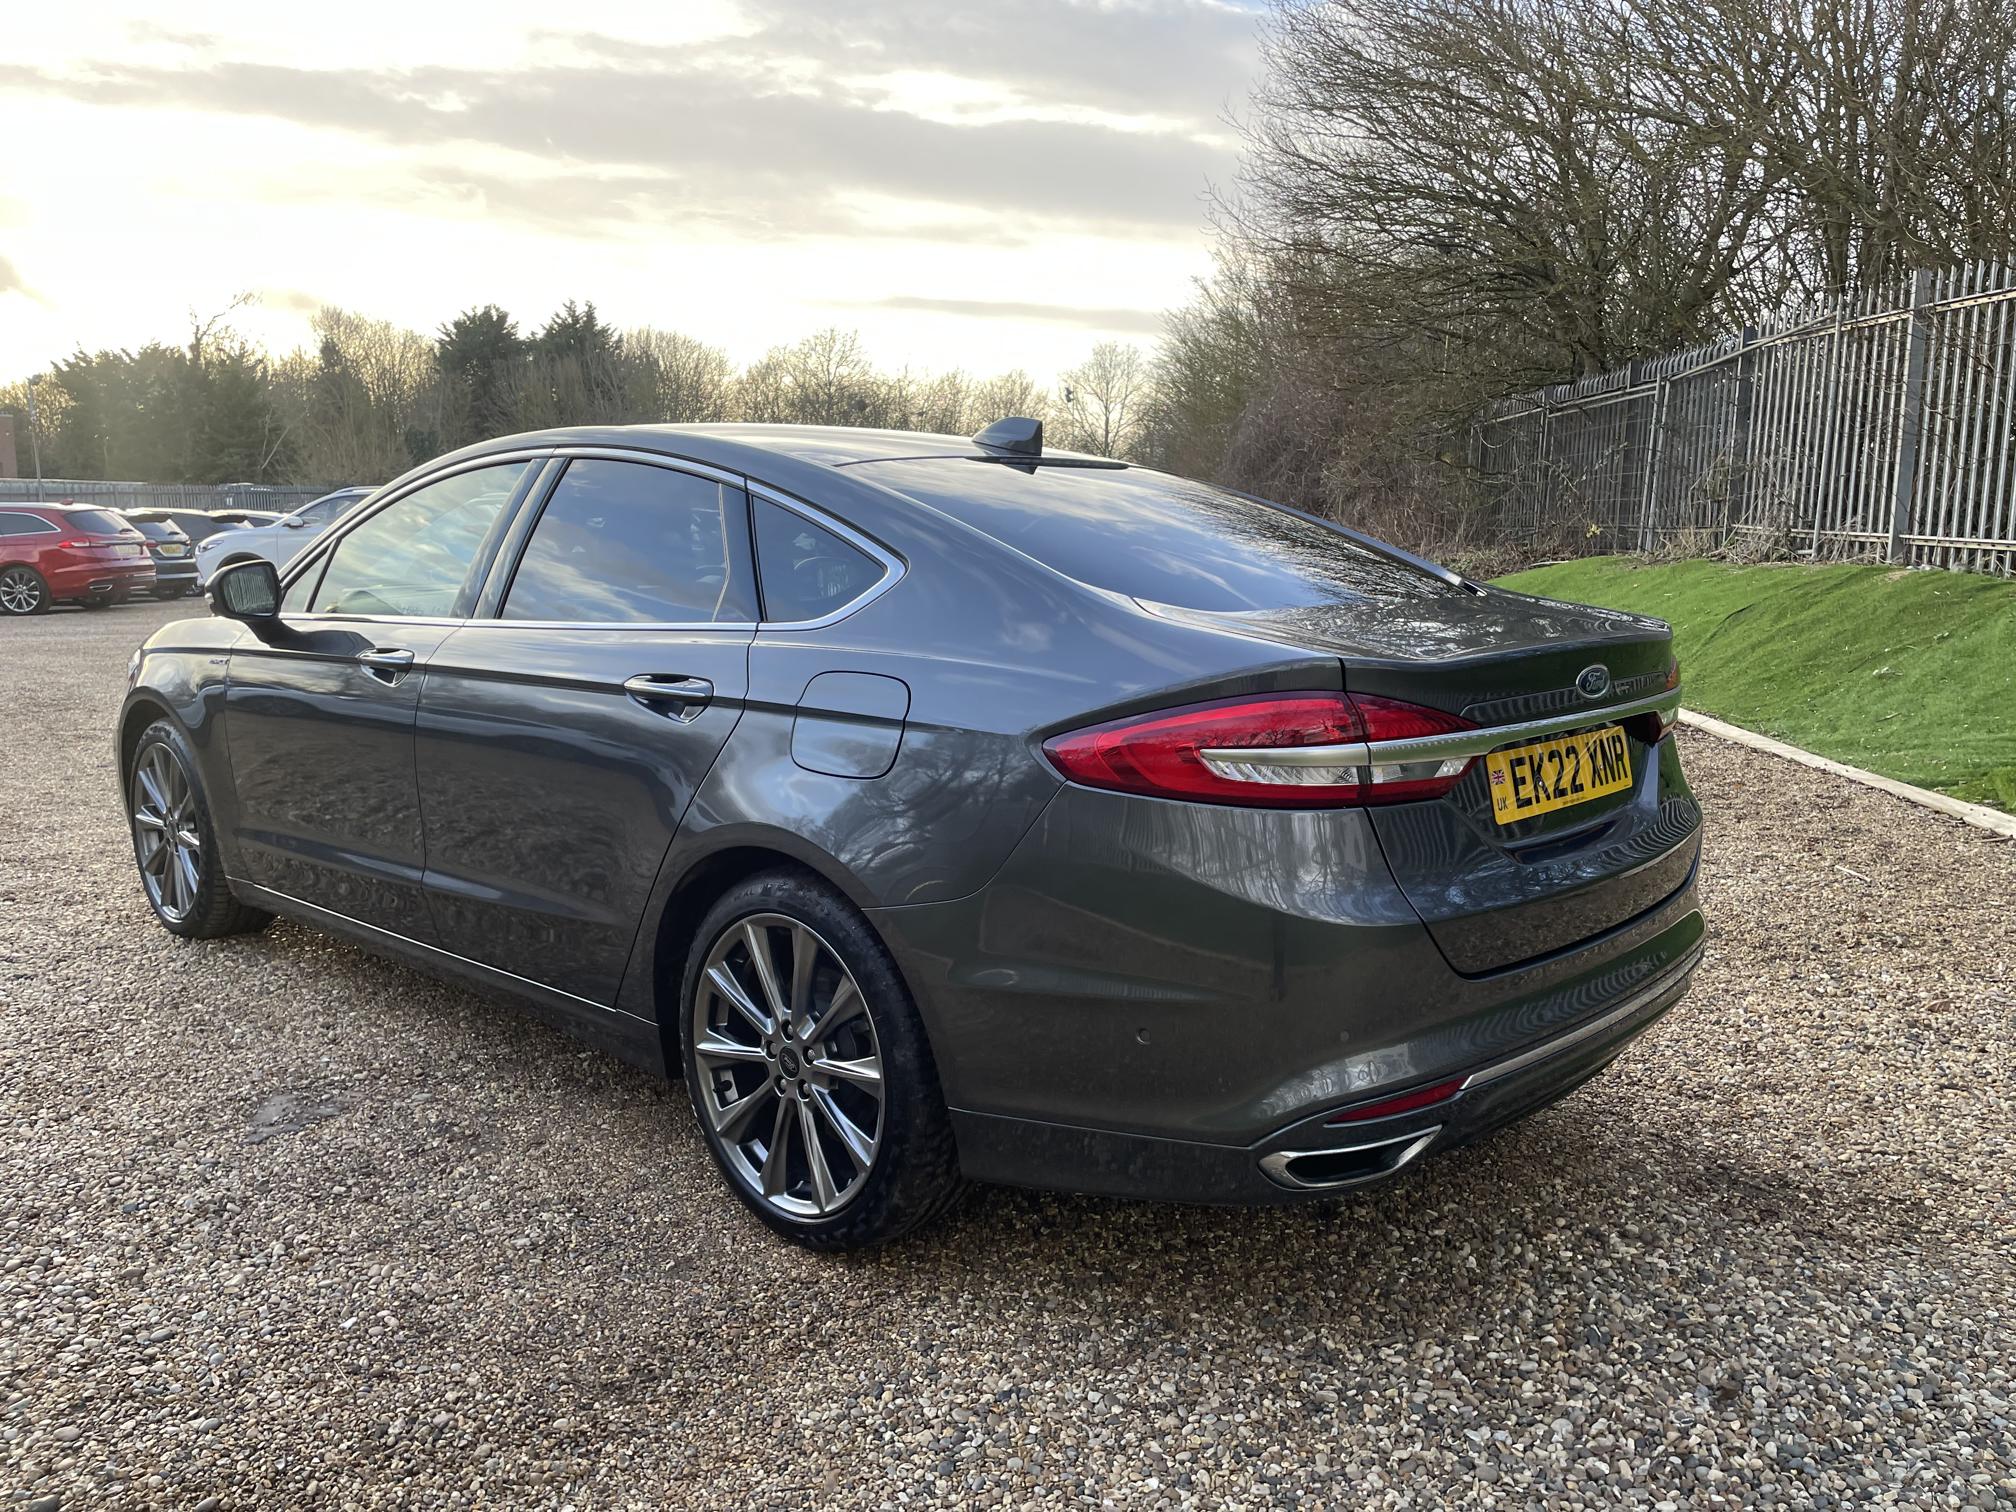 Nearly New Hybrid Mondeo Vignale for sale HEV Chelmsford 